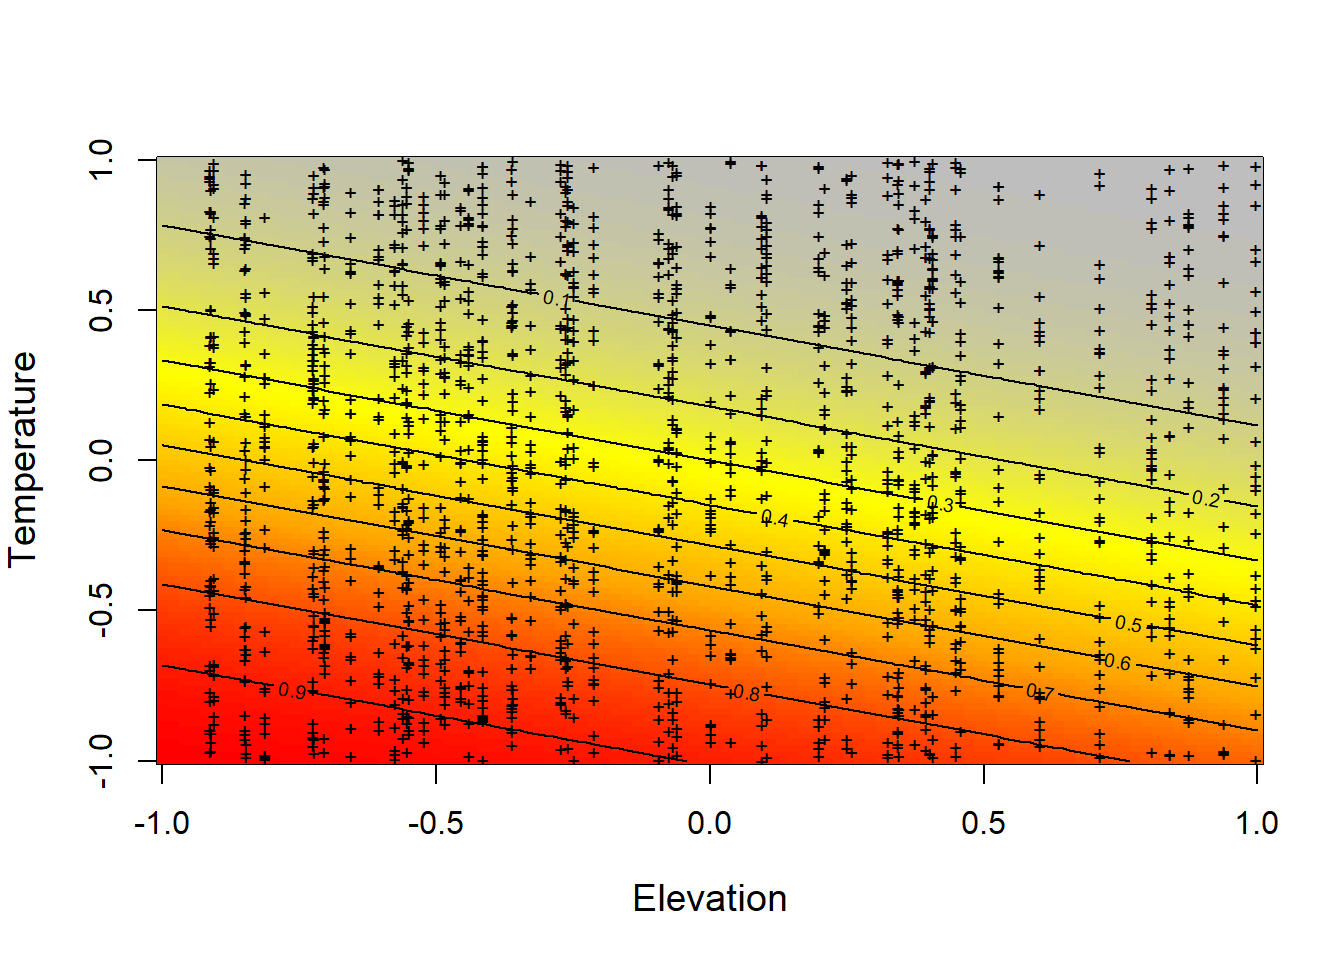 Relationship constructed between the simulated data of the expected probability of detection (detectability) of tapir (p) represented with the color scale from gray to red, against elevation and temperature simultaneously. In this case, the interaction between the two covariates has a linear relationship that is given by the value of alpha3 = 0 that we have previously established.